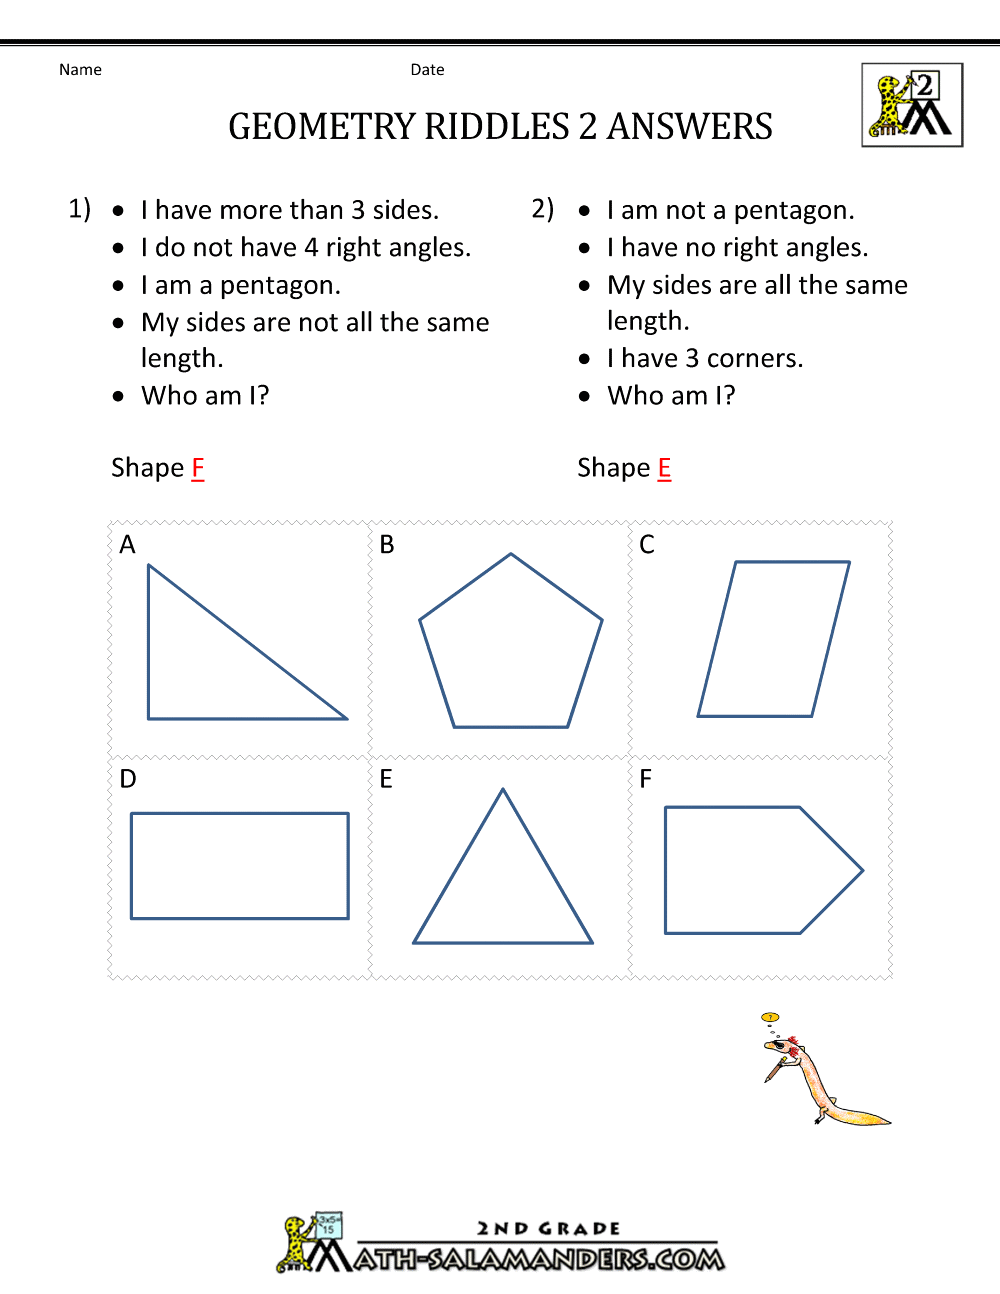 geometry riddles figures and names